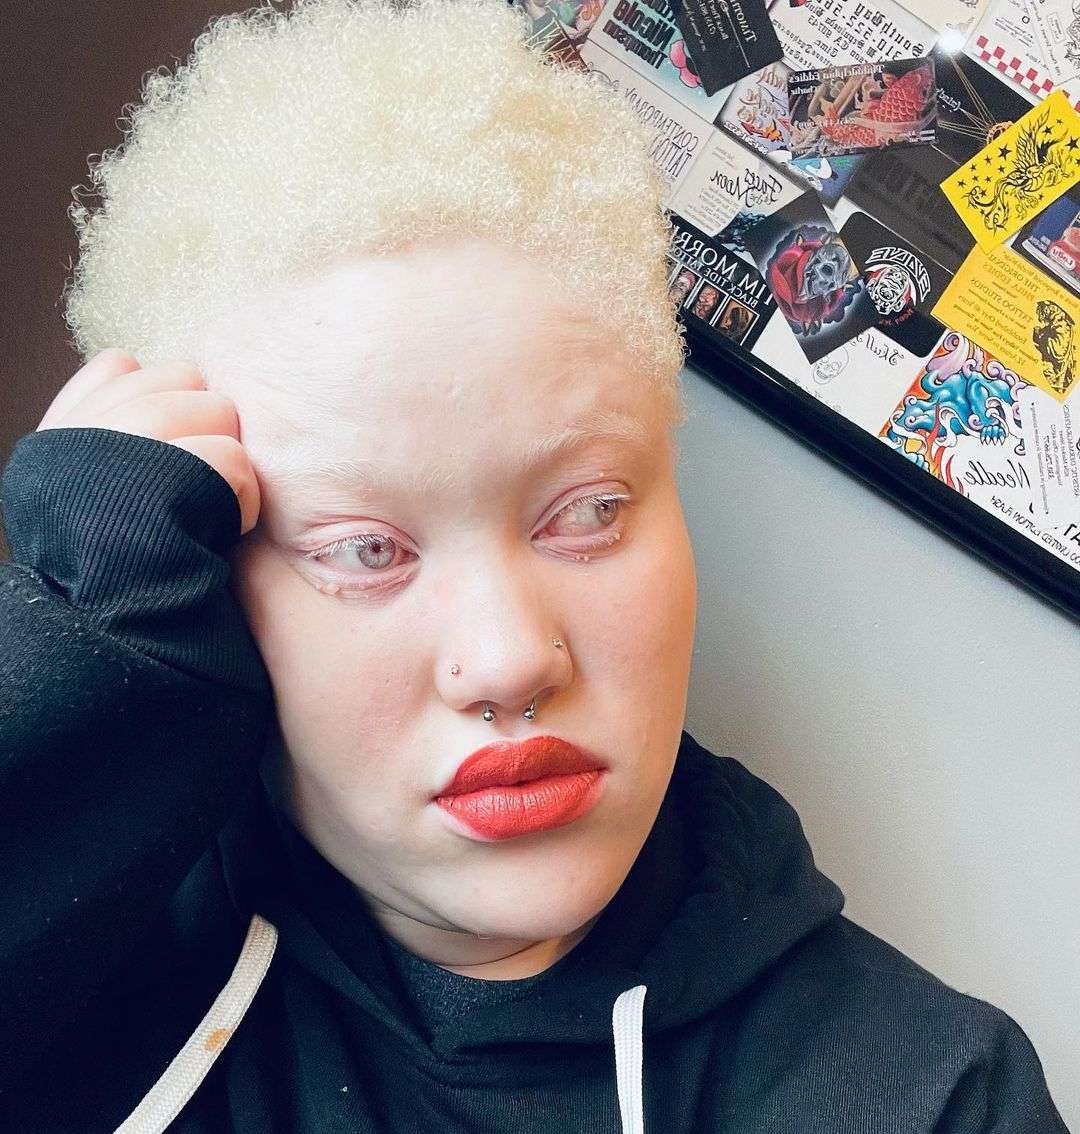 Black woman with blonde hair due to albinism